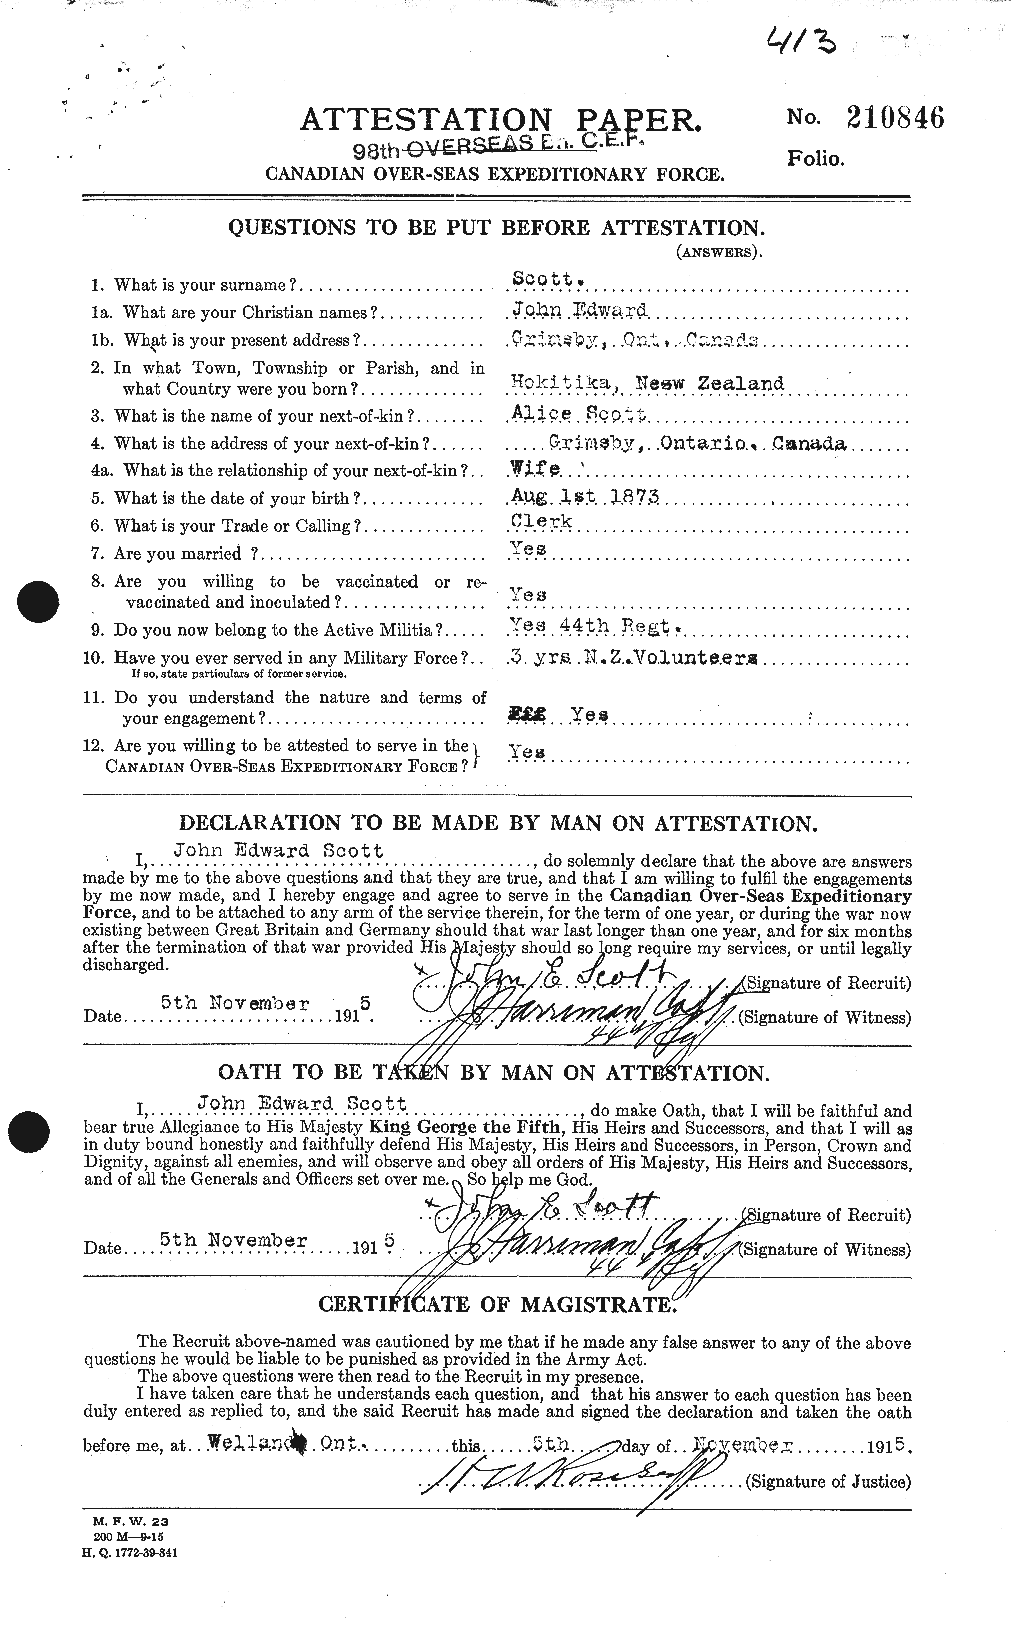 Personnel Records of the First World War - CEF 084635a